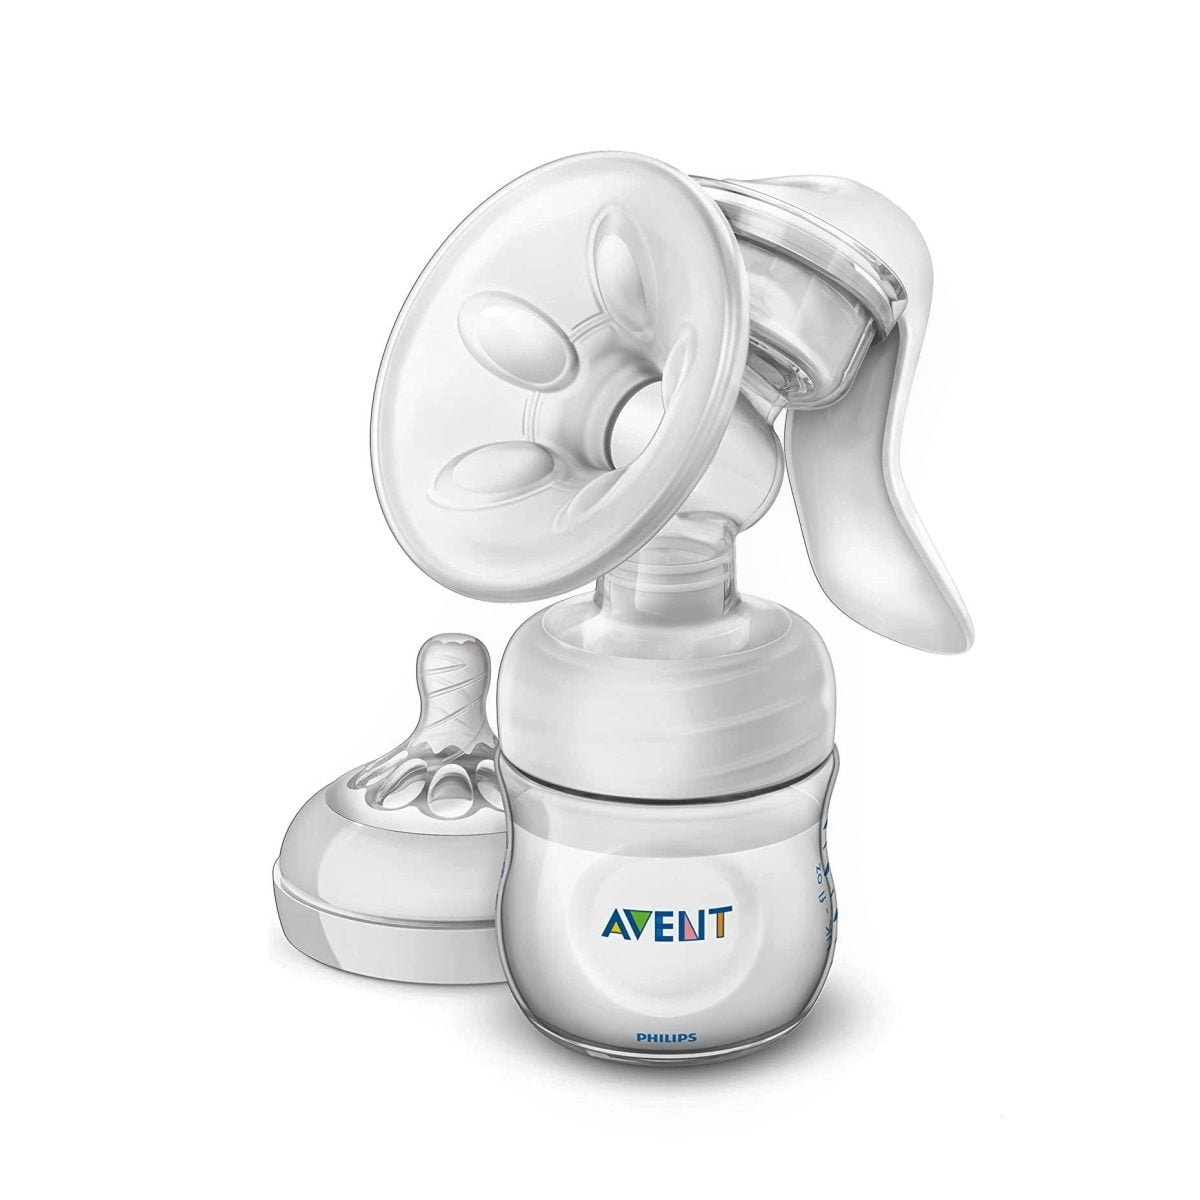 61Yi4Qcqns. Ac Sl1500 &Amp;Lt;H1&Amp;Gt;Philips Avent Breast Scf330/70 Pump Manual, Clear&Amp;Lt;/H1&Amp;Gt; Https://Www.youtube.com/Watch?V=Opctlnkr3Jq &Amp;Lt;Ul Class=&Amp;Quot;A-Unordered-List A-Vertical A-Spacing-Mini&Amp;Quot;&Amp;Gt; &Amp;Lt;Li&Amp;Gt;&Amp;Lt;Span Class=&Amp;Quot;A-List-Item&Amp;Quot;&Amp;Gt;Brand: Philips Avent&Amp;Lt;/Span&Amp;Gt;&Amp;Lt;/Li&Amp;Gt; &Amp;Lt;Li&Amp;Gt;&Amp;Lt;Span Class=&Amp;Quot;A-List-Item&Amp;Quot;&Amp;Gt;Type: Breast Pump&Amp;Lt;/Span&Amp;Gt;&Amp;Lt;/Li&Amp;Gt; &Amp;Lt;Li&Amp;Gt;&Amp;Lt;Span Class=&Amp;Quot;A-List-Item&Amp;Quot;&Amp;Gt;Made Up Of Bpa Free Materials&Amp;Lt;/Span&Amp;Gt;&Amp;Lt;/Li&Amp;Gt; &Amp;Lt;Li&Amp;Gt;&Amp;Lt;Span Class=&Amp;Quot;A-List-Item&Amp;Quot;&Amp;Gt;The Soft Cushion Comfortably Cradles Your Breast For A Fluid And Pleasant Experience&Amp;Lt;/Span&Amp;Gt;&Amp;Lt;/Li&Amp;Gt; &Amp;Lt;/Ul&Amp;Gt; Massage Cushion Has A New Soft Velvety Texture That Gives A Warm Feel To The Skin For Comfortable, Gentle Stimulation Of Your Milk Flow. The Cushion Is Designed To Gently Mimic Your Baby'S Suckling To Help Stimulate Let Down. The Wide Breast Shaped Nipple Promotes Natural Latch On Similar To The Breast, Making It Easy For Your Baby To Combine Breast And Bottle Feeding. Breast Pump Philips Avent Manual Breast Pump